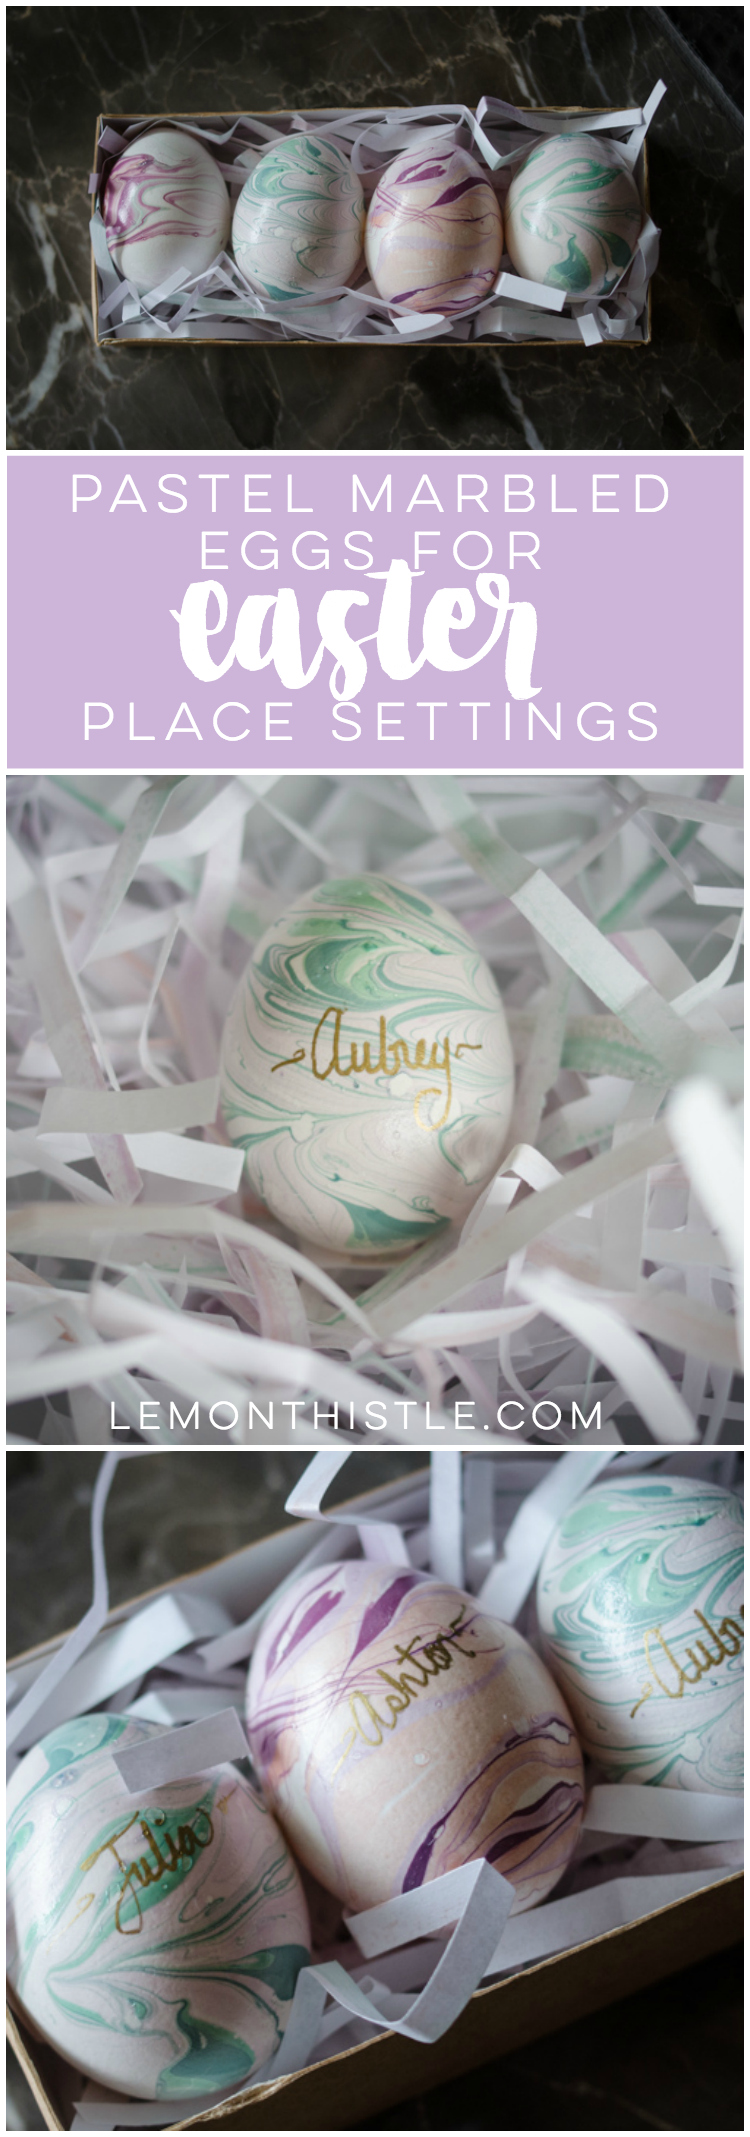 I LOVE these pastel marbled easter eggs... they're gorgeous! And lettering names on them in gold is such a nice touch for easter dinner place settings